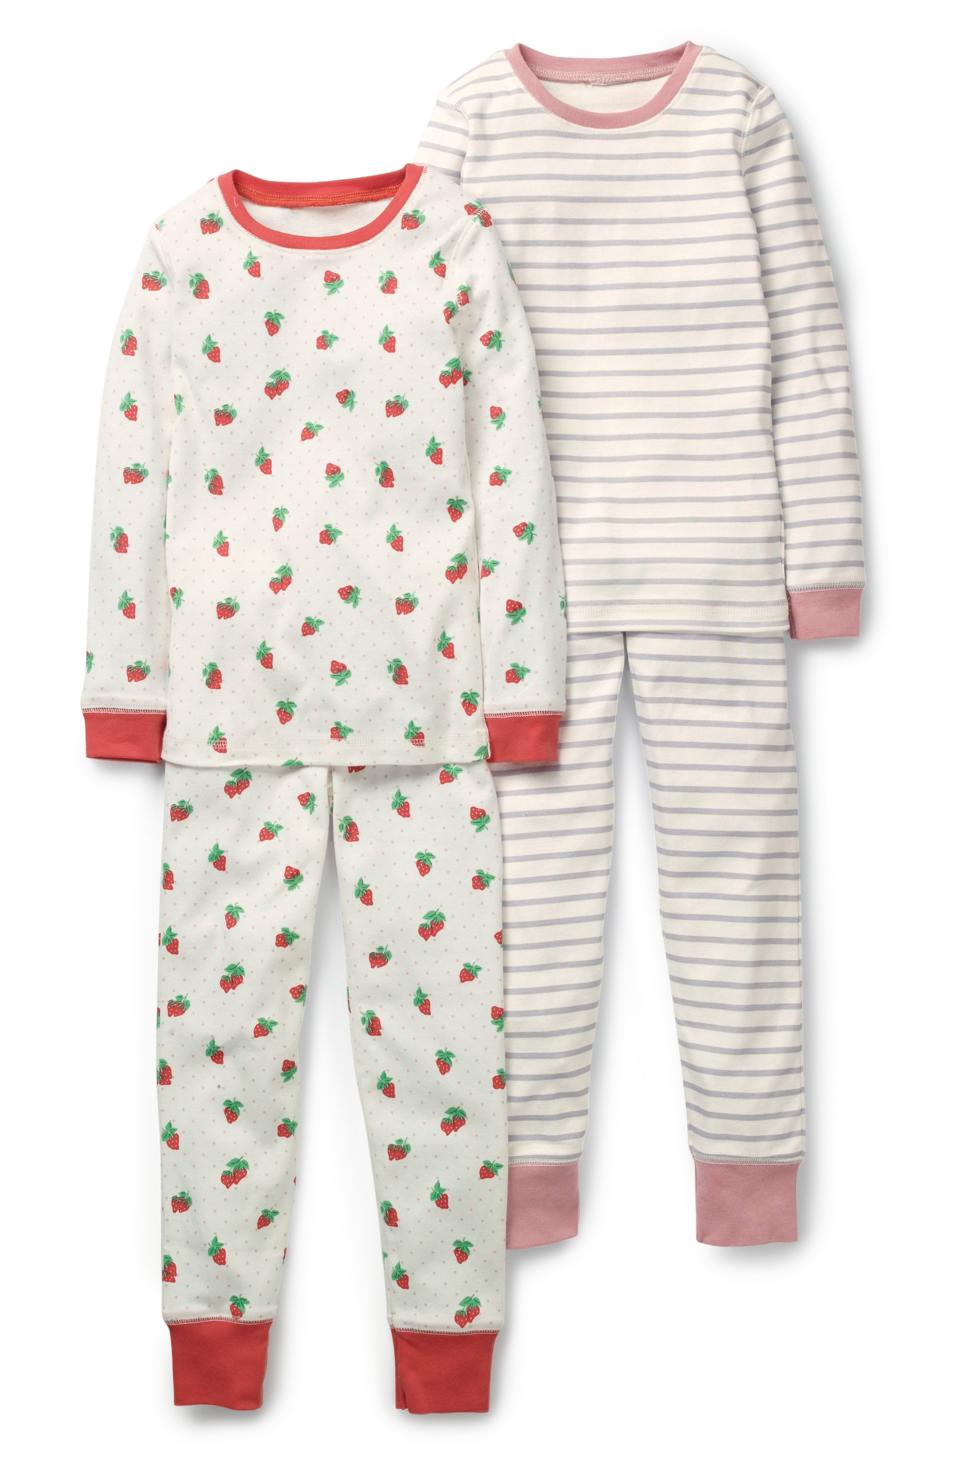 The Best Kids' Pajamas to Buy Right Now